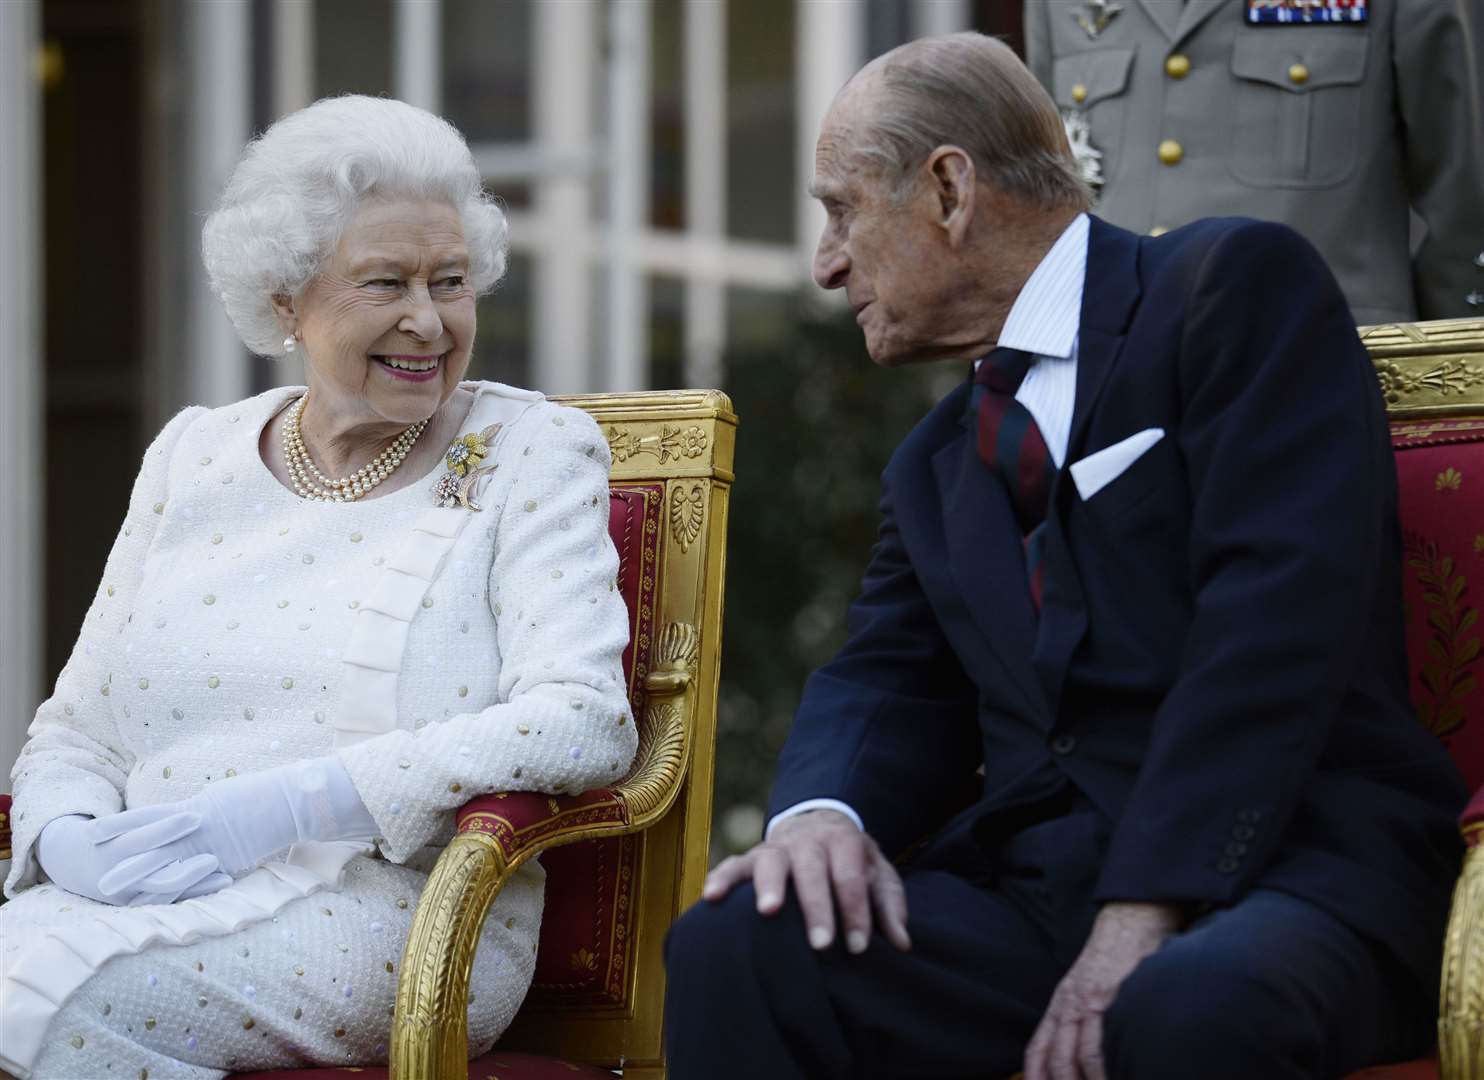 The Queen once described the duke as her ‘constant strength and guide’ (Owen Humphreys/PA)